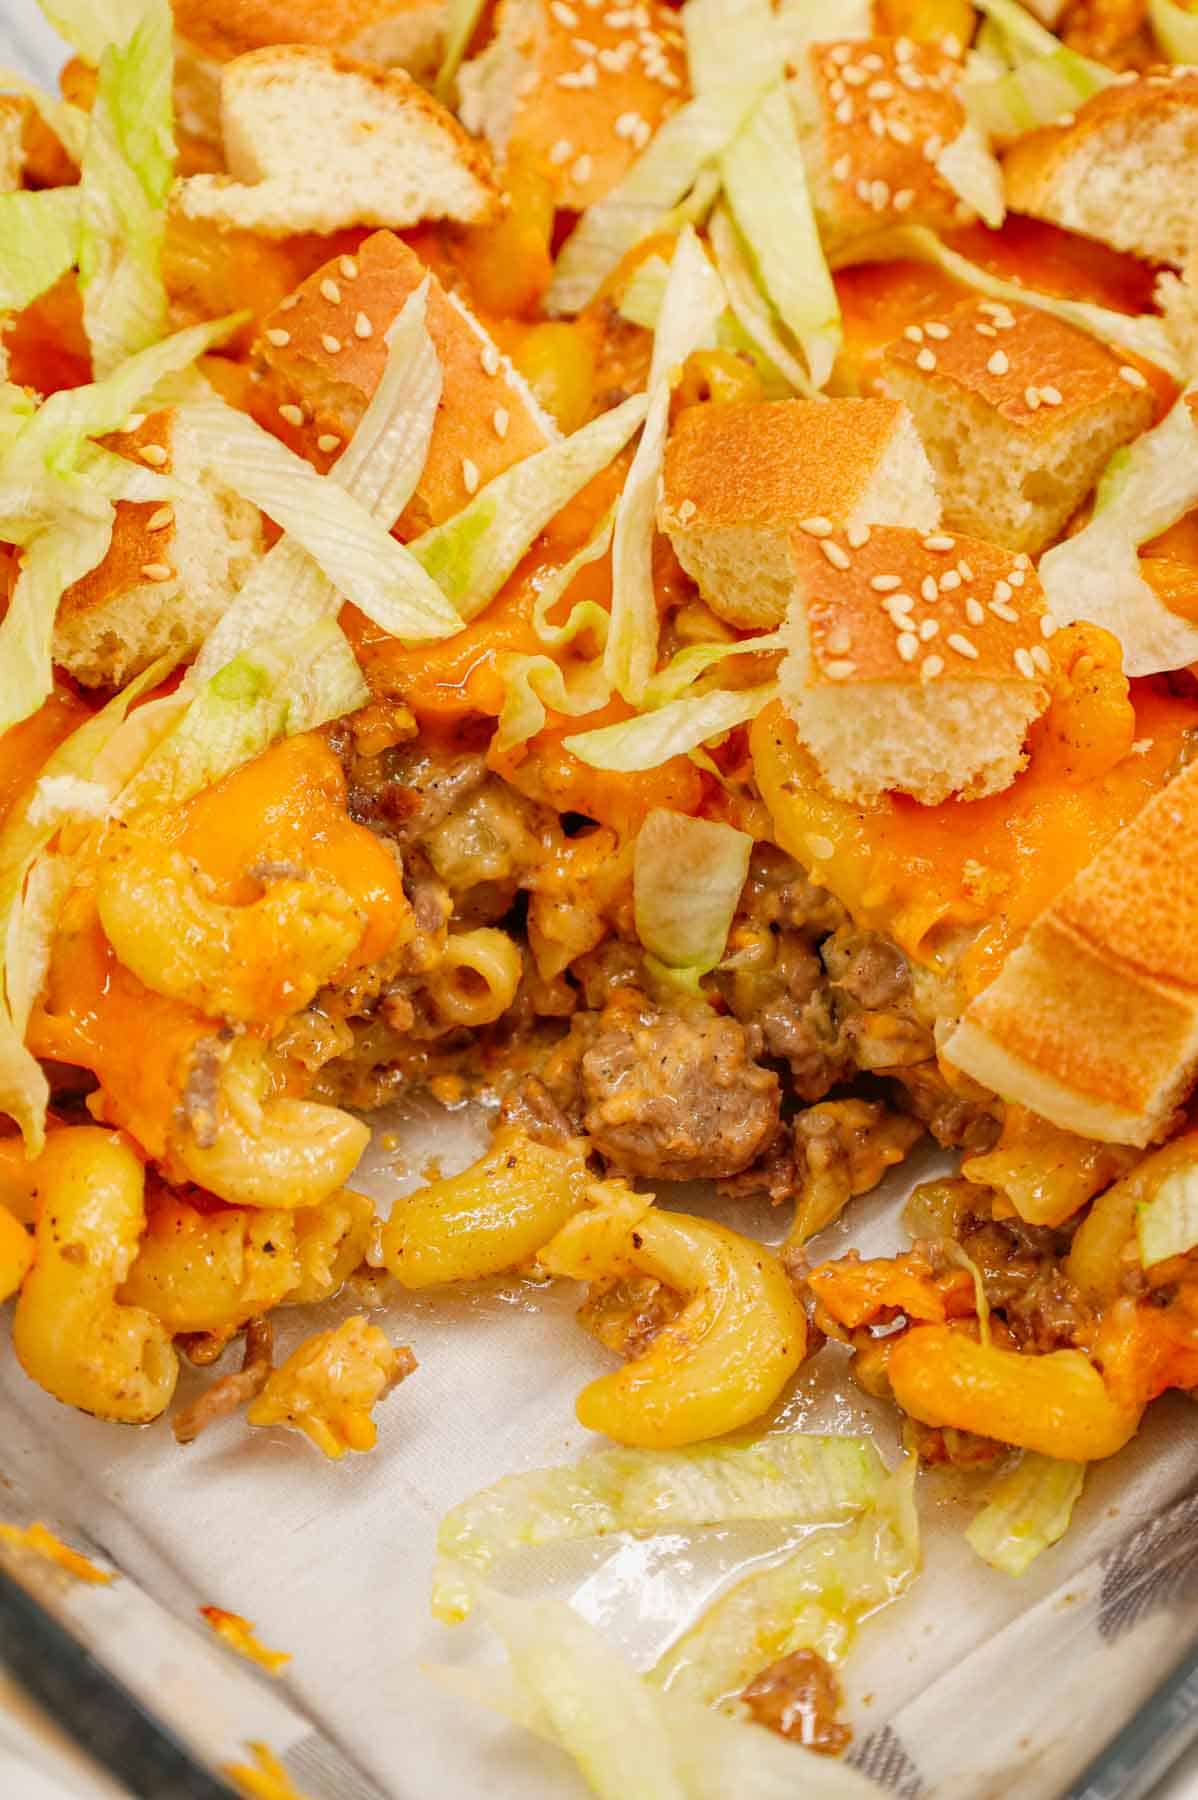 Big Mac Pasta is a hearty baked pasta recipe loaded with ground beef, diced onions, pickles, sesame seeds, Thousand Island dressing and cheddar cheese and topped with chopped hamburger buns and shredded lettuce.